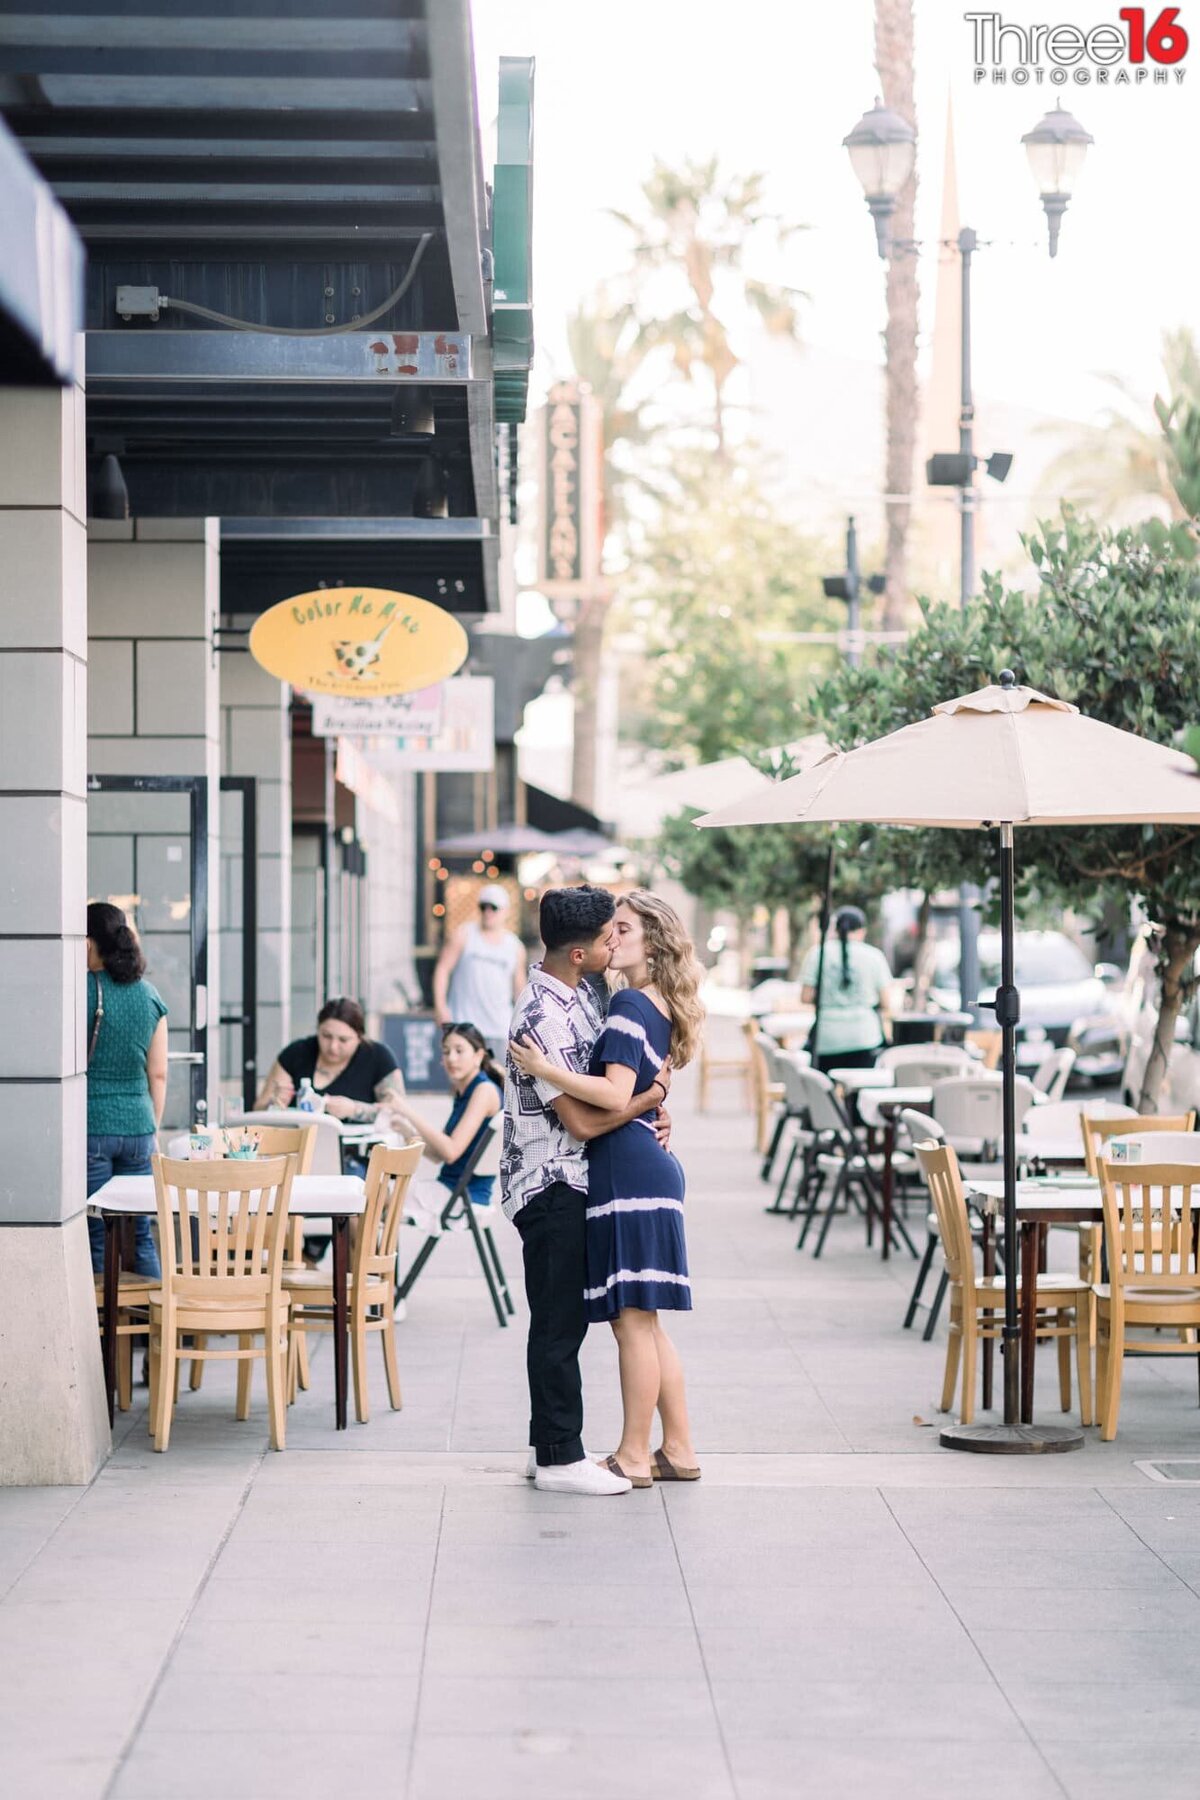 Engaged couple share a kiss on the sidewalk in Downtown Brea